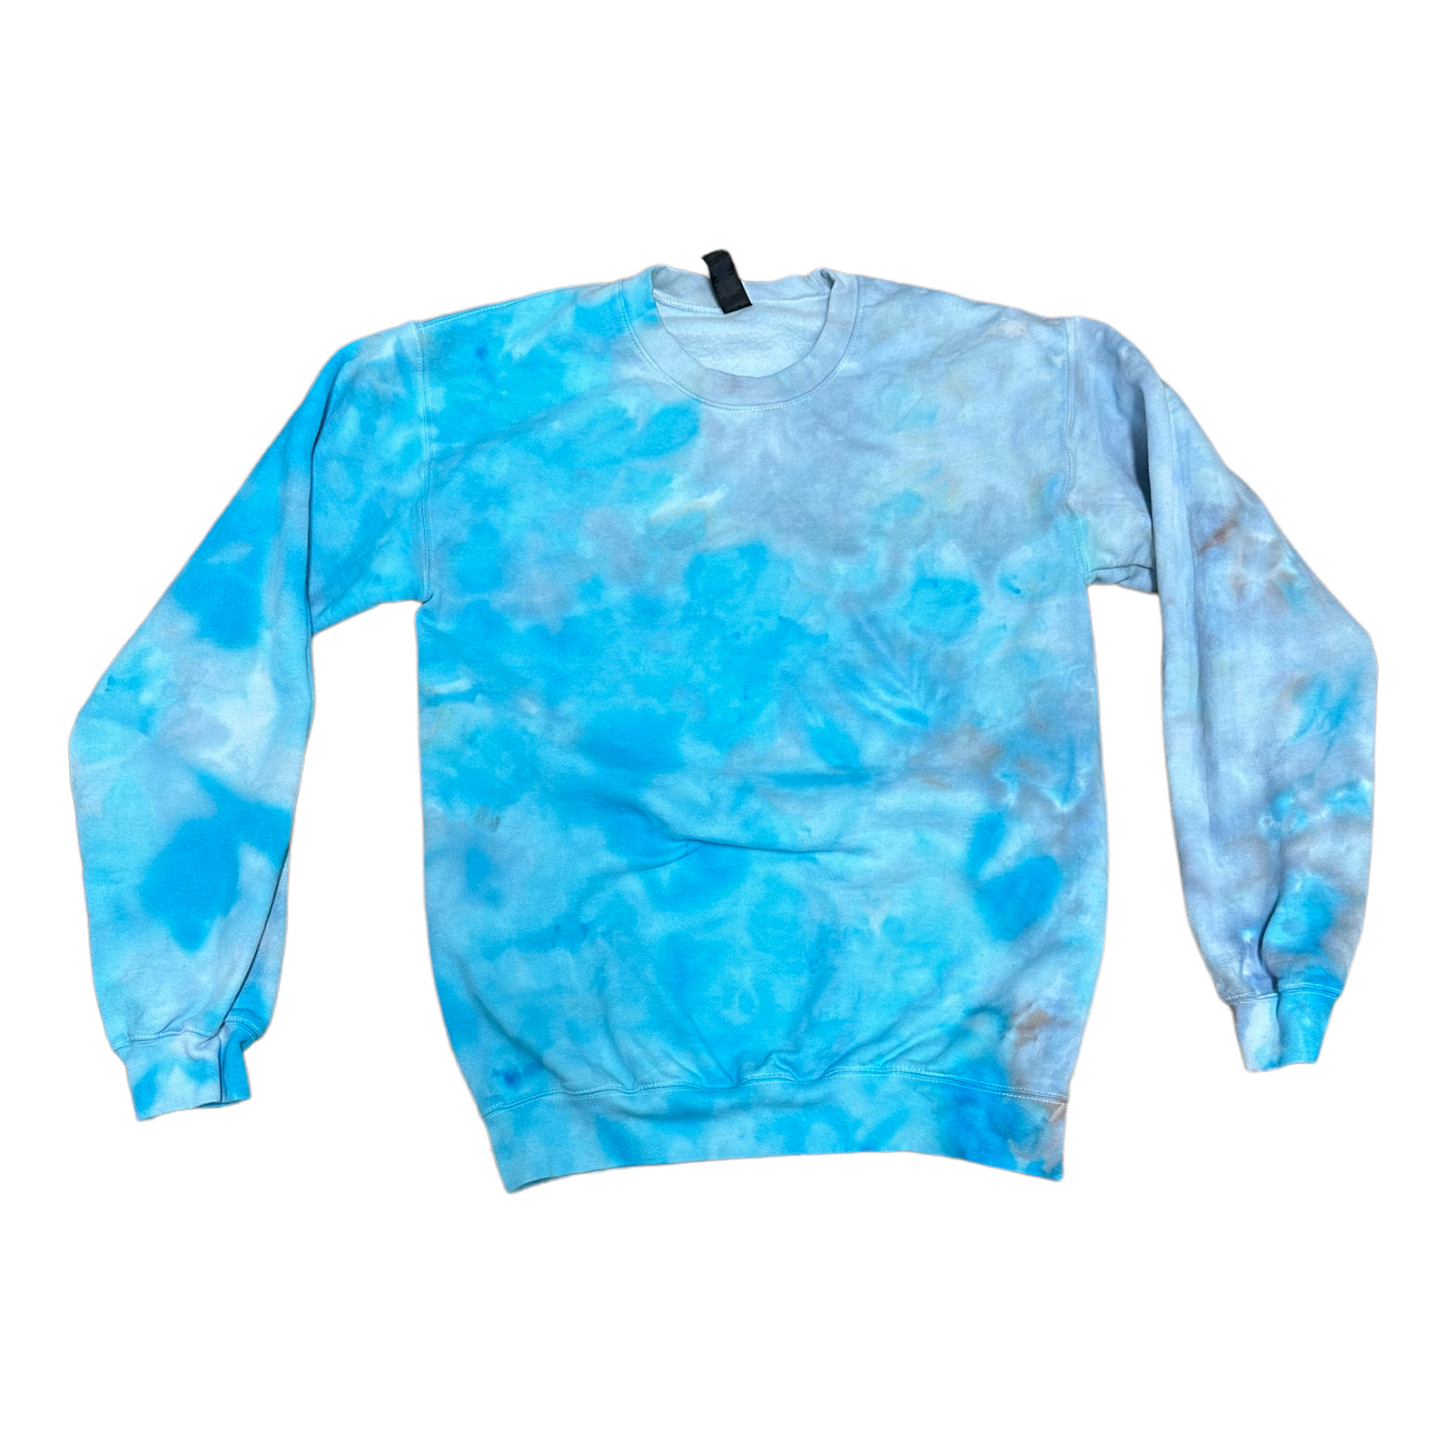 Adult Small Blue and Gray Ice Tie Dye Crewneck Sweater